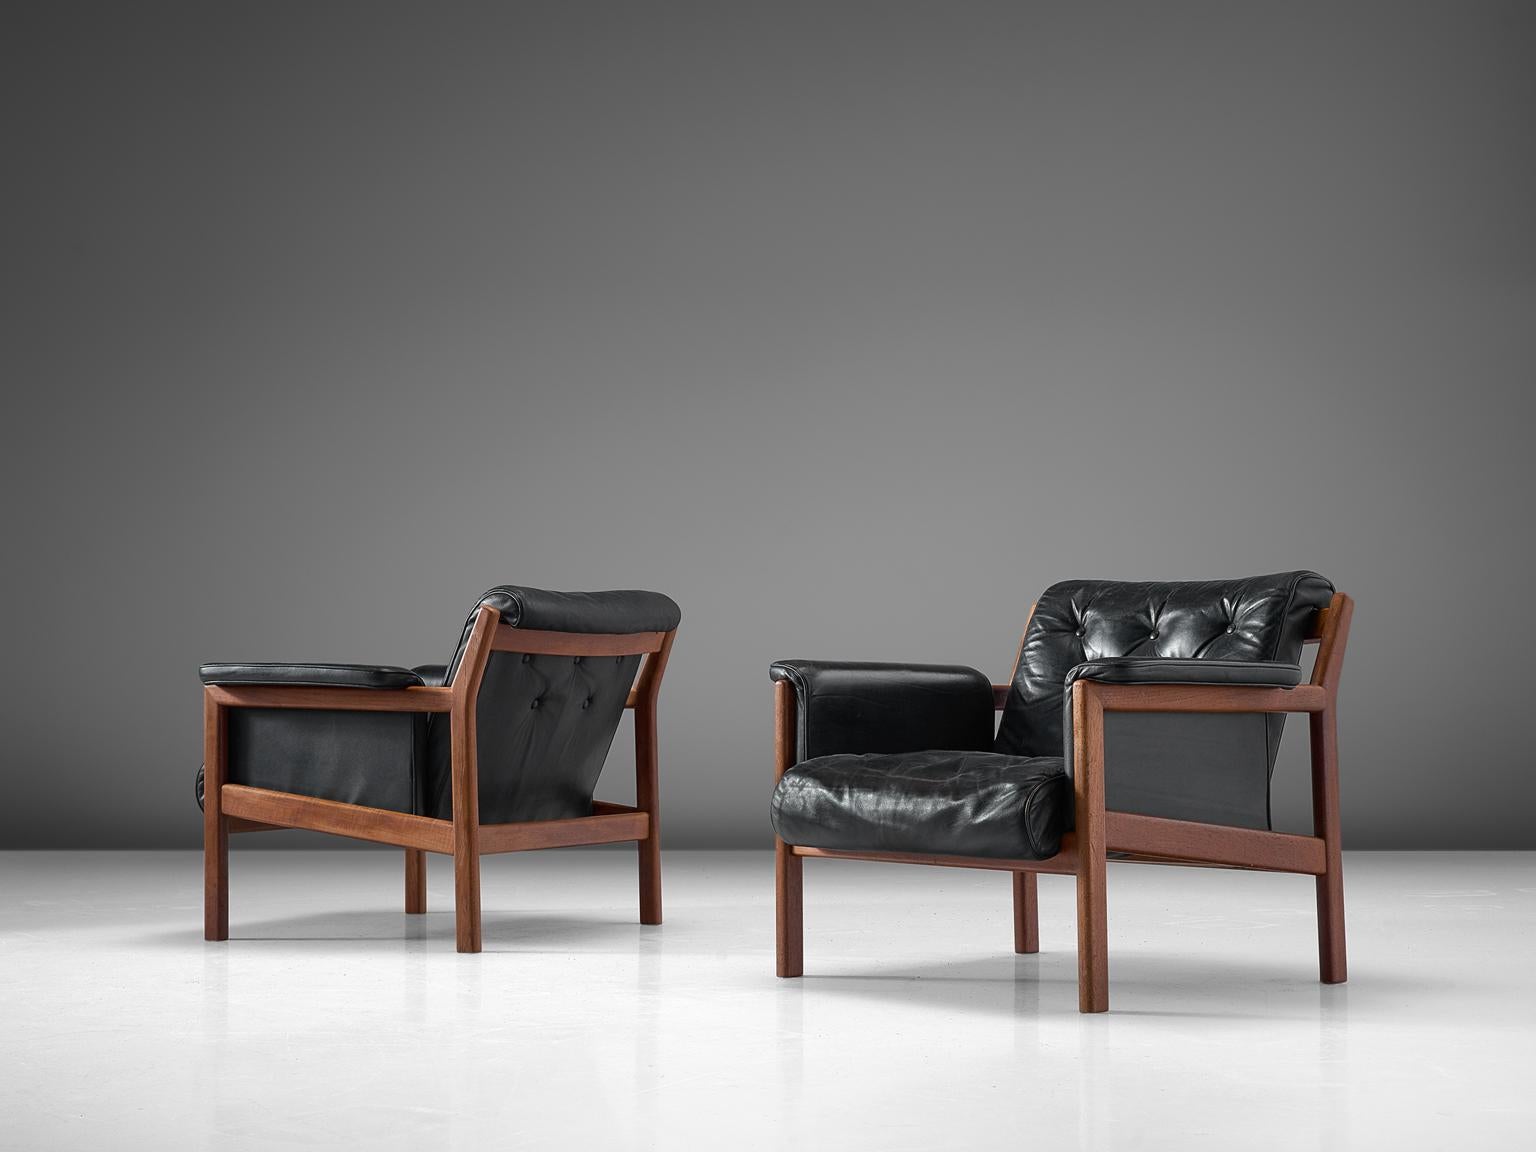 Karl-Erik Ekselius for JOC, pair of lounge chairs, leather and teak, Sweden, 1960s.

This set of 2 arm chairs feature a teak frame with slatted back and an angular, geometric frame. It contains a tufted seat and back are comfortable and support